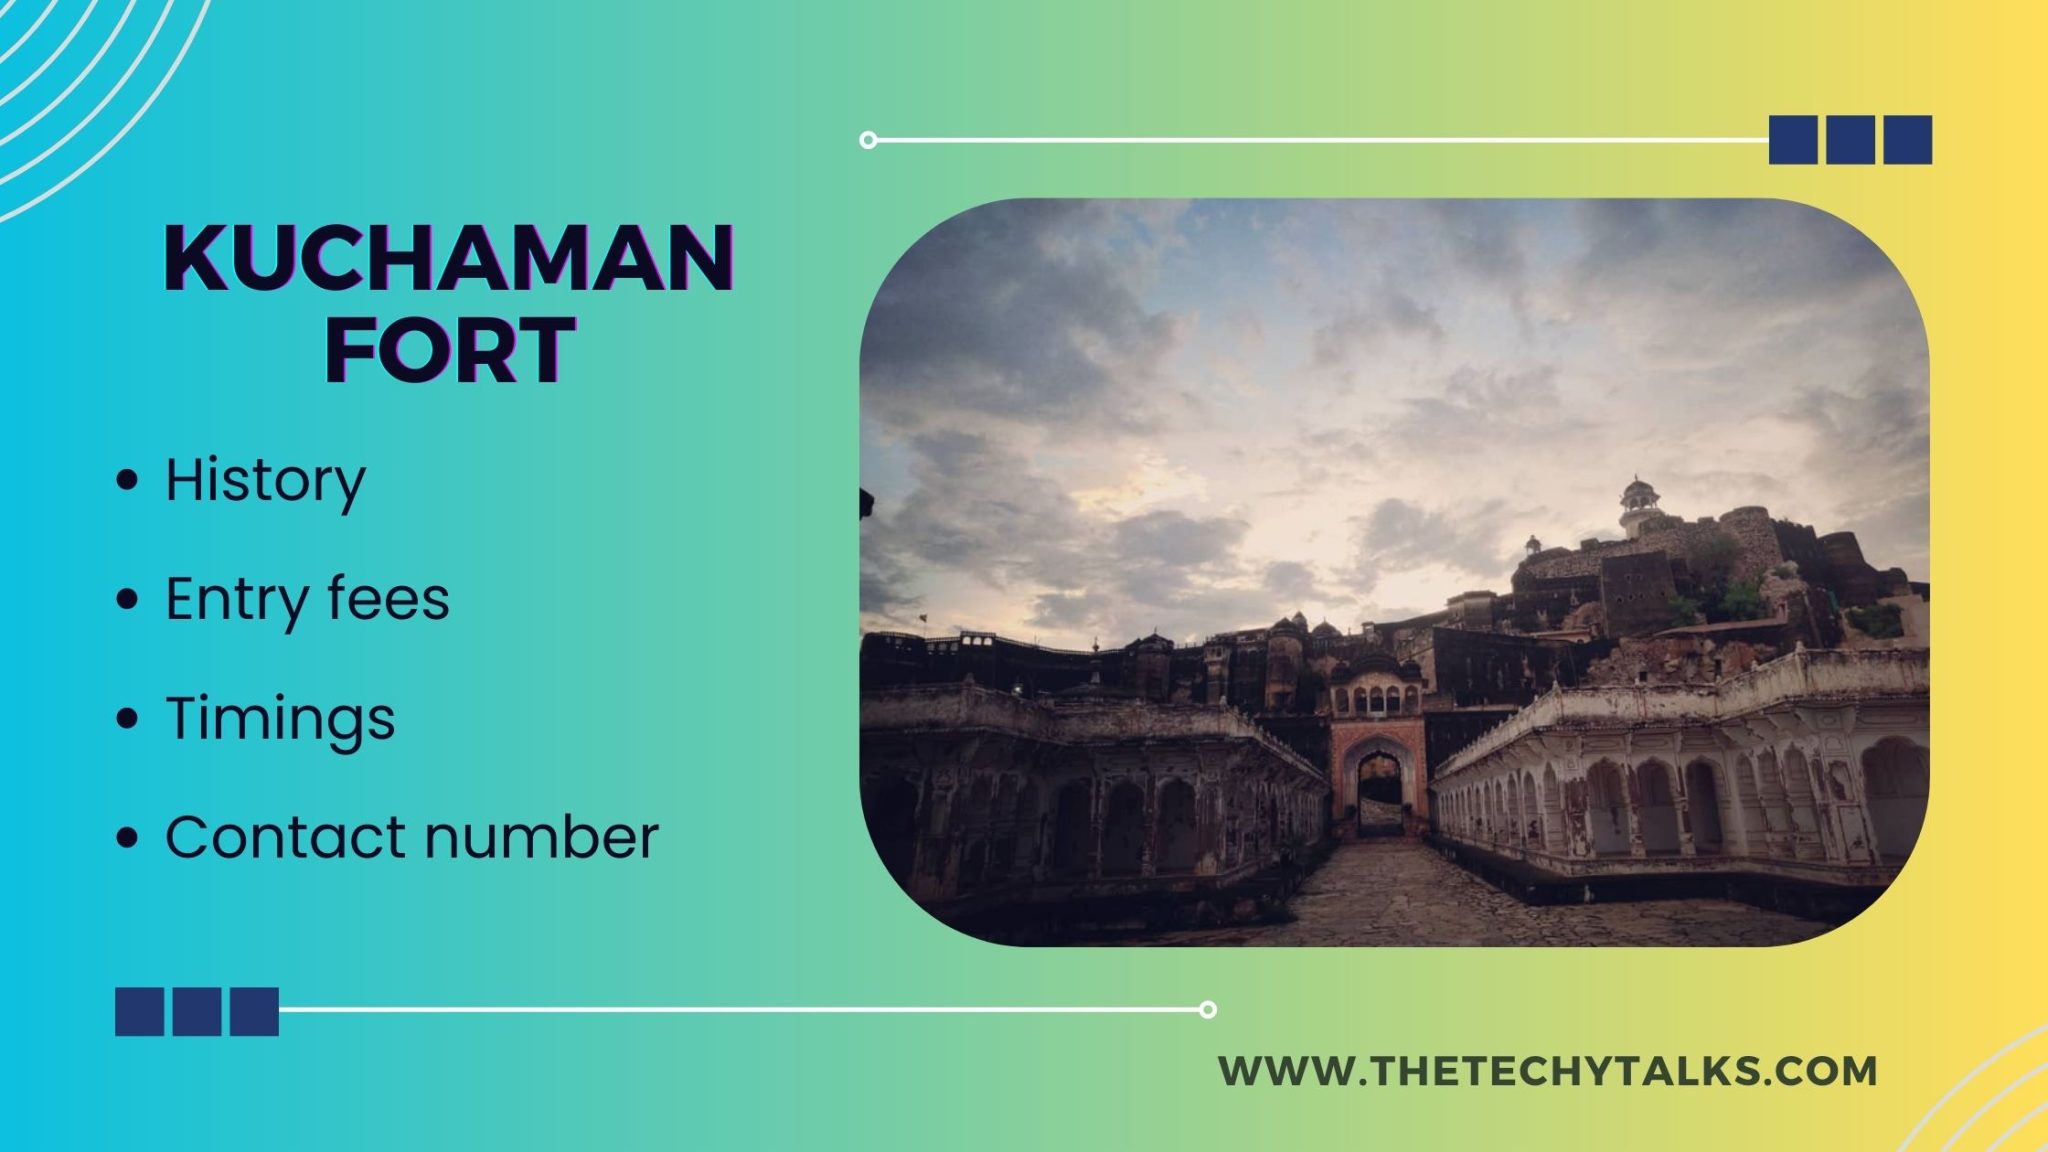 Kuchaman Fort: History, Entry Fees, Timings, Contact Number and Pictures